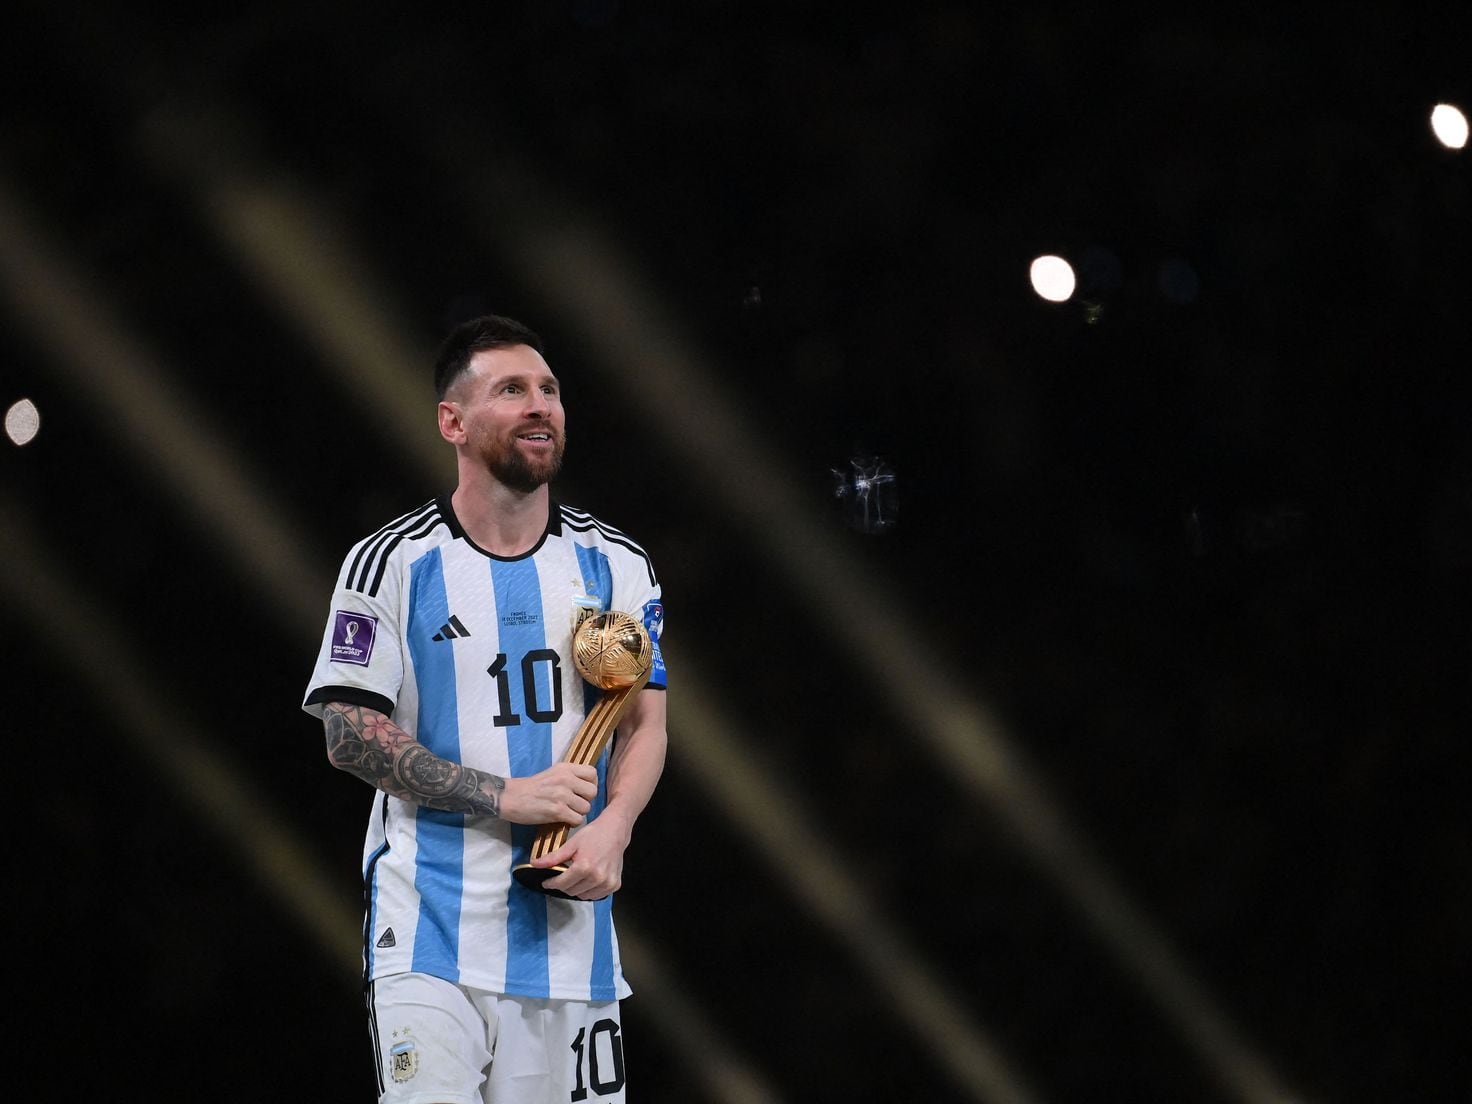 Lionel Messi Merch: Buy Argentina World Cup Soccer Jersey Online